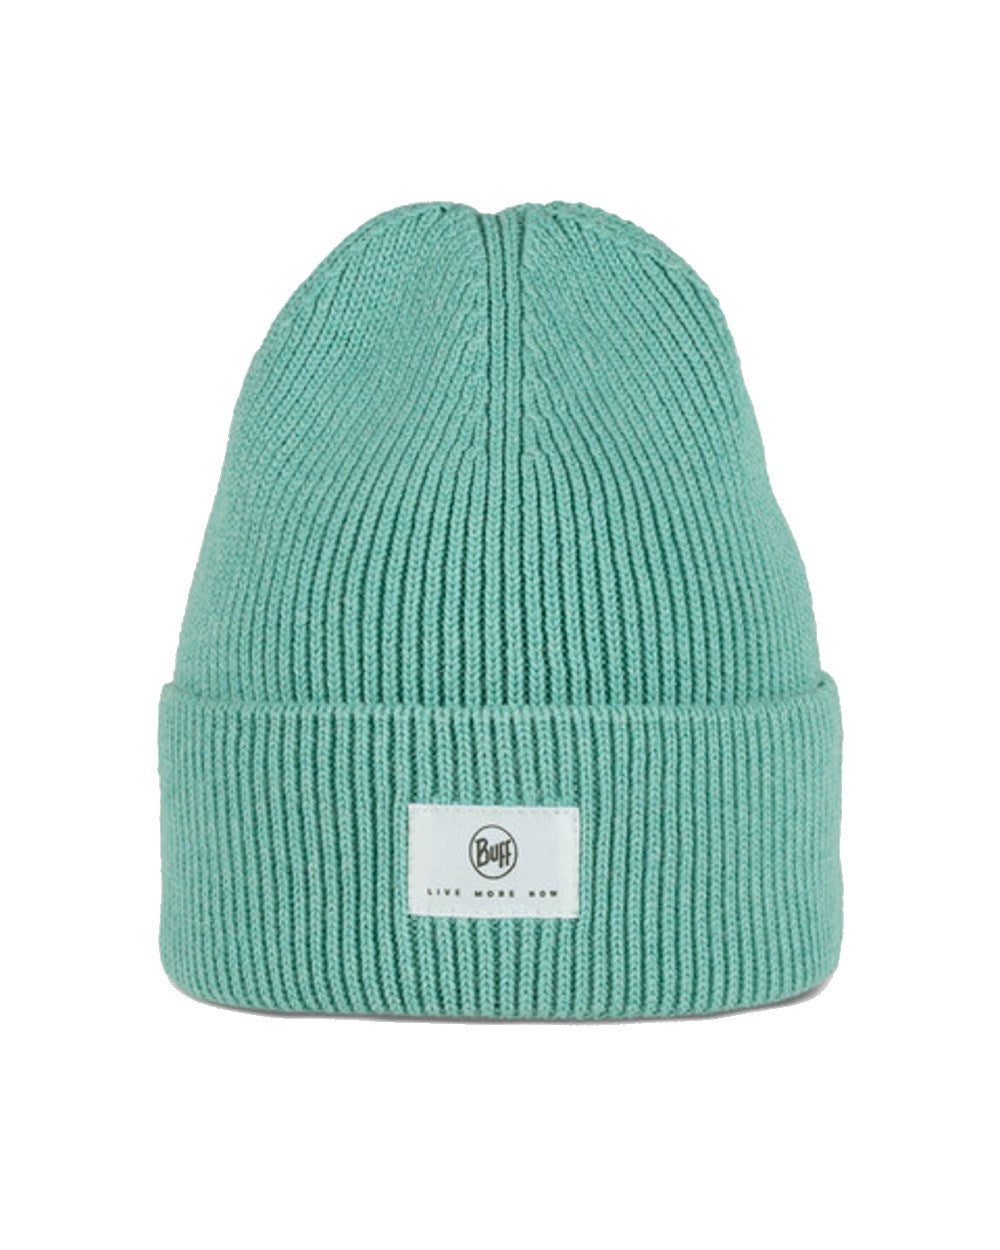 Buff Drisk Knitted Beanie in Pool 